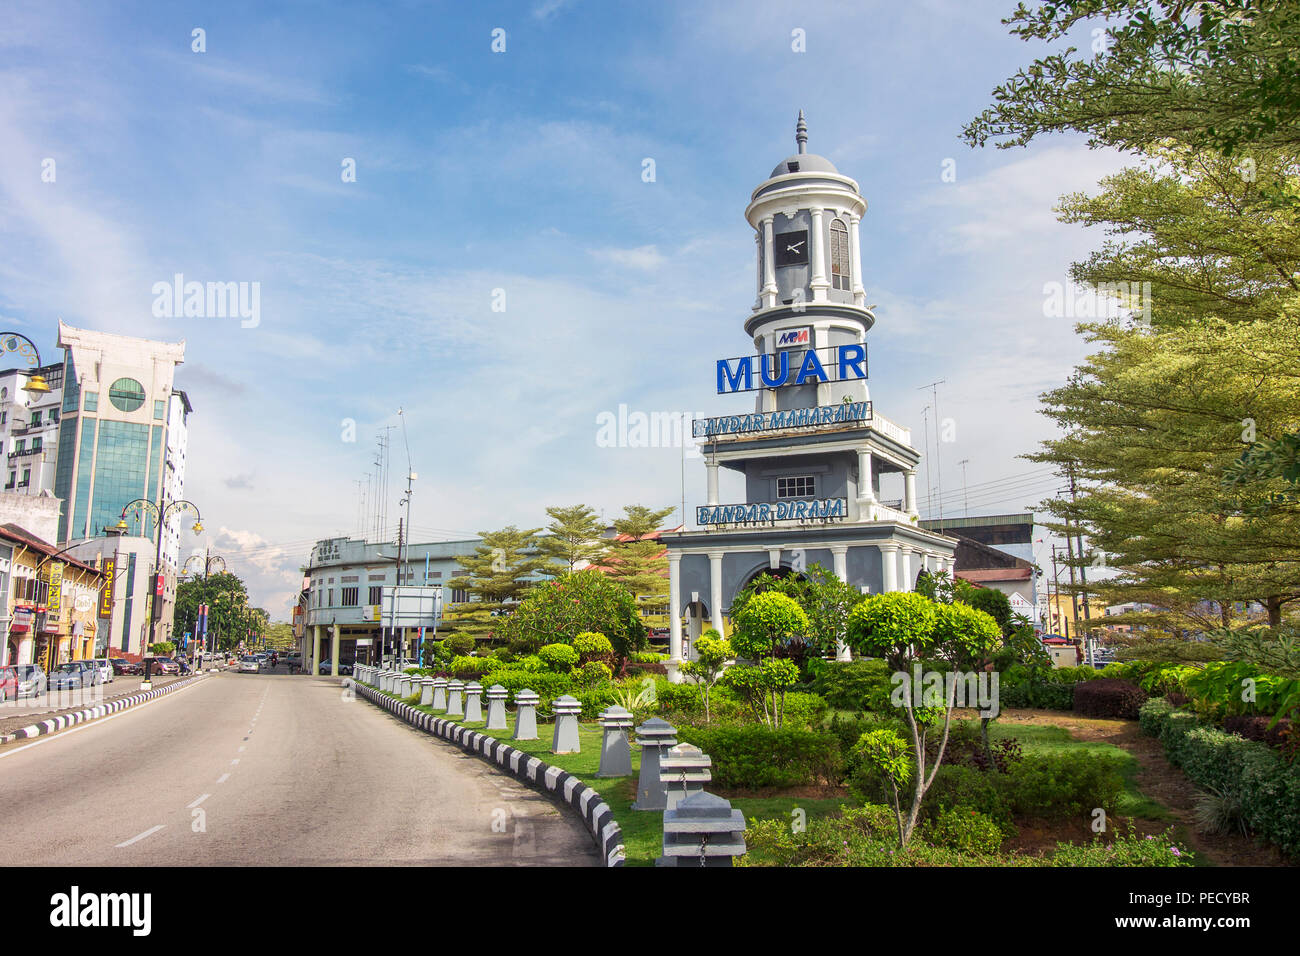 Muar clock tower is one of the famous attractions landmark in the town of Muar, The old English architecture is what makes the clock distinctive and u Stock Photo